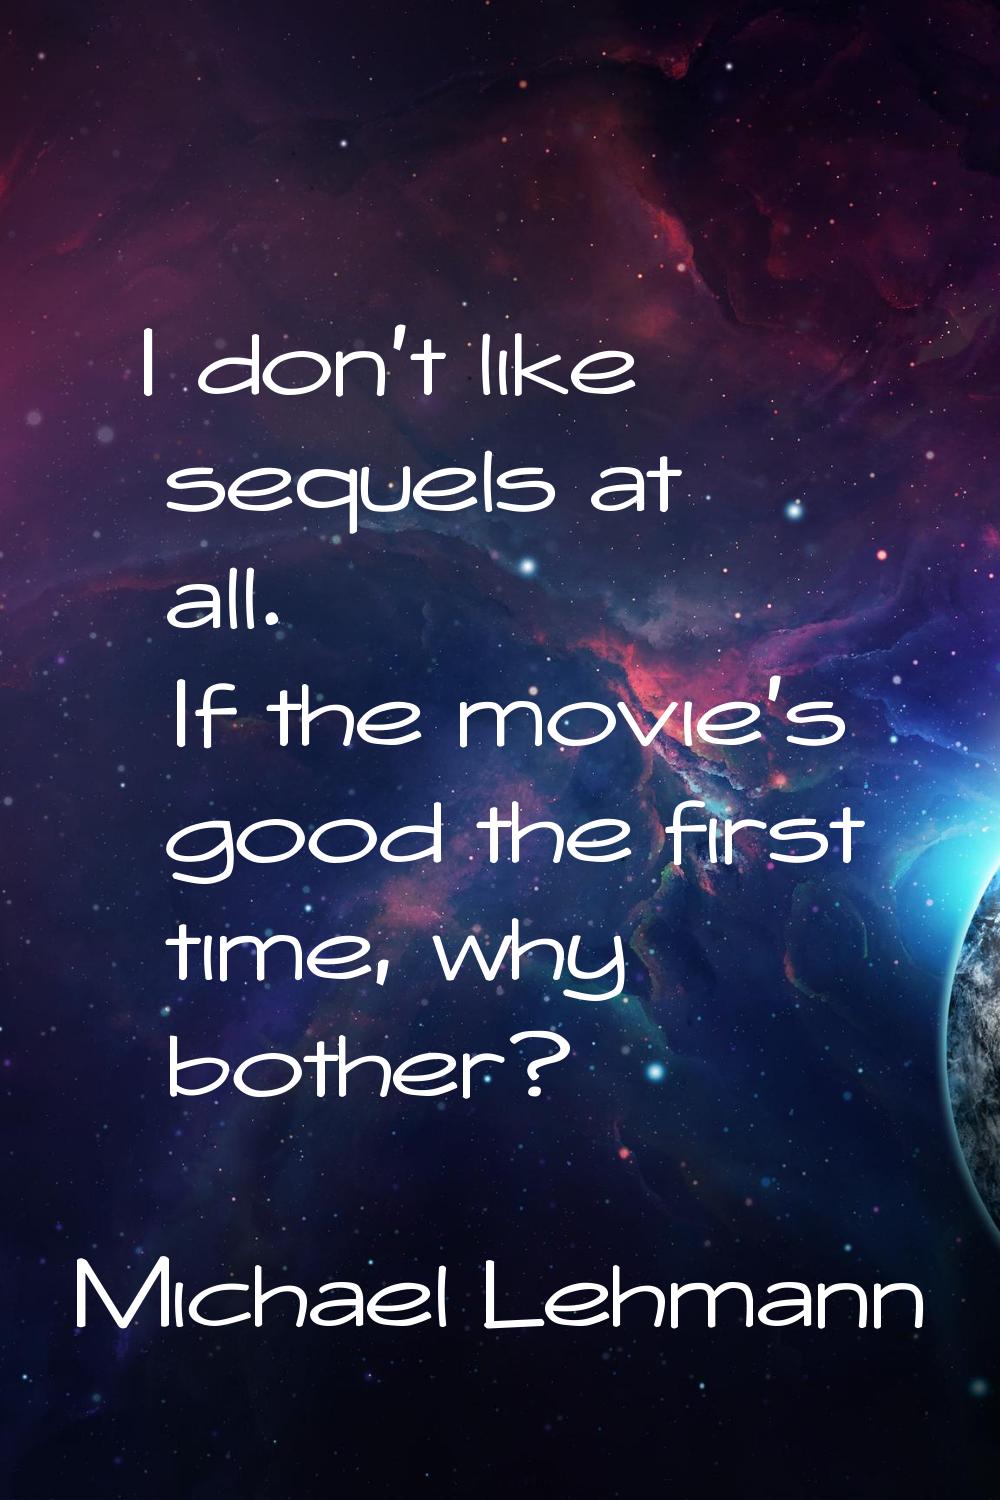 I don't like sequels at all. If the movie's good the first time, why bother?